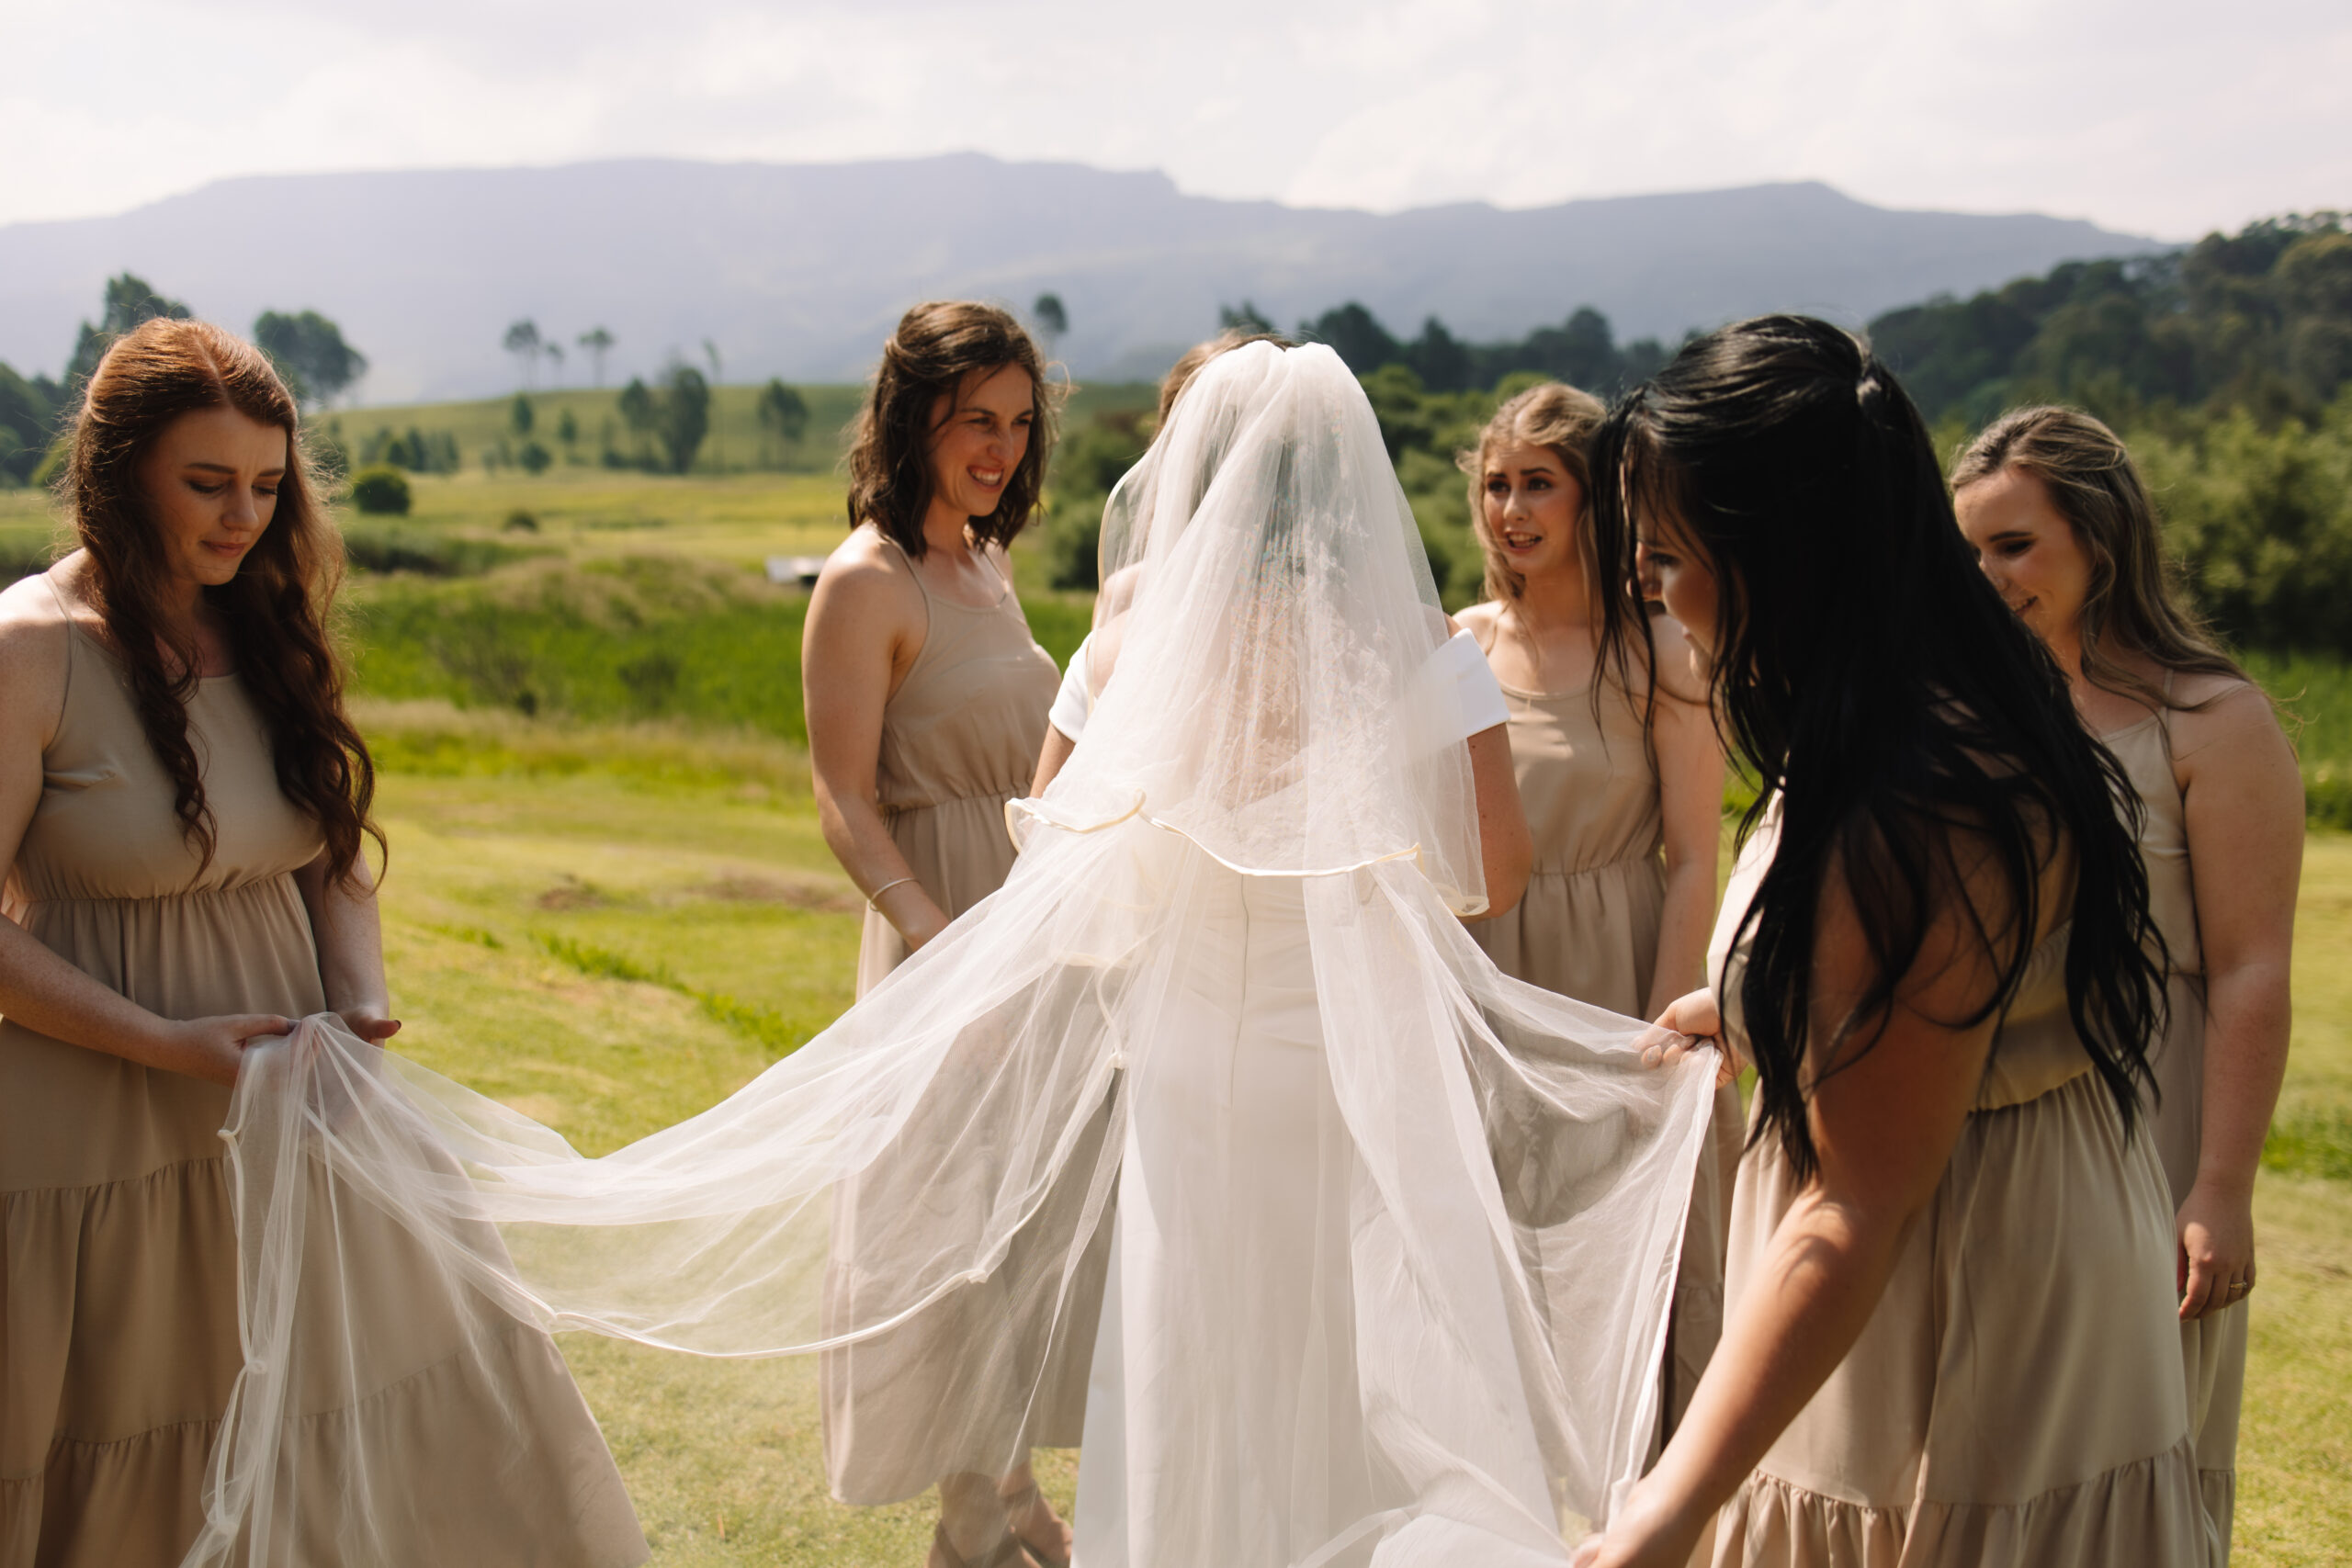 A bride with a long veil, standing outside surrounded by her bridesmaids holding her veil and admiring how beautiful she looks